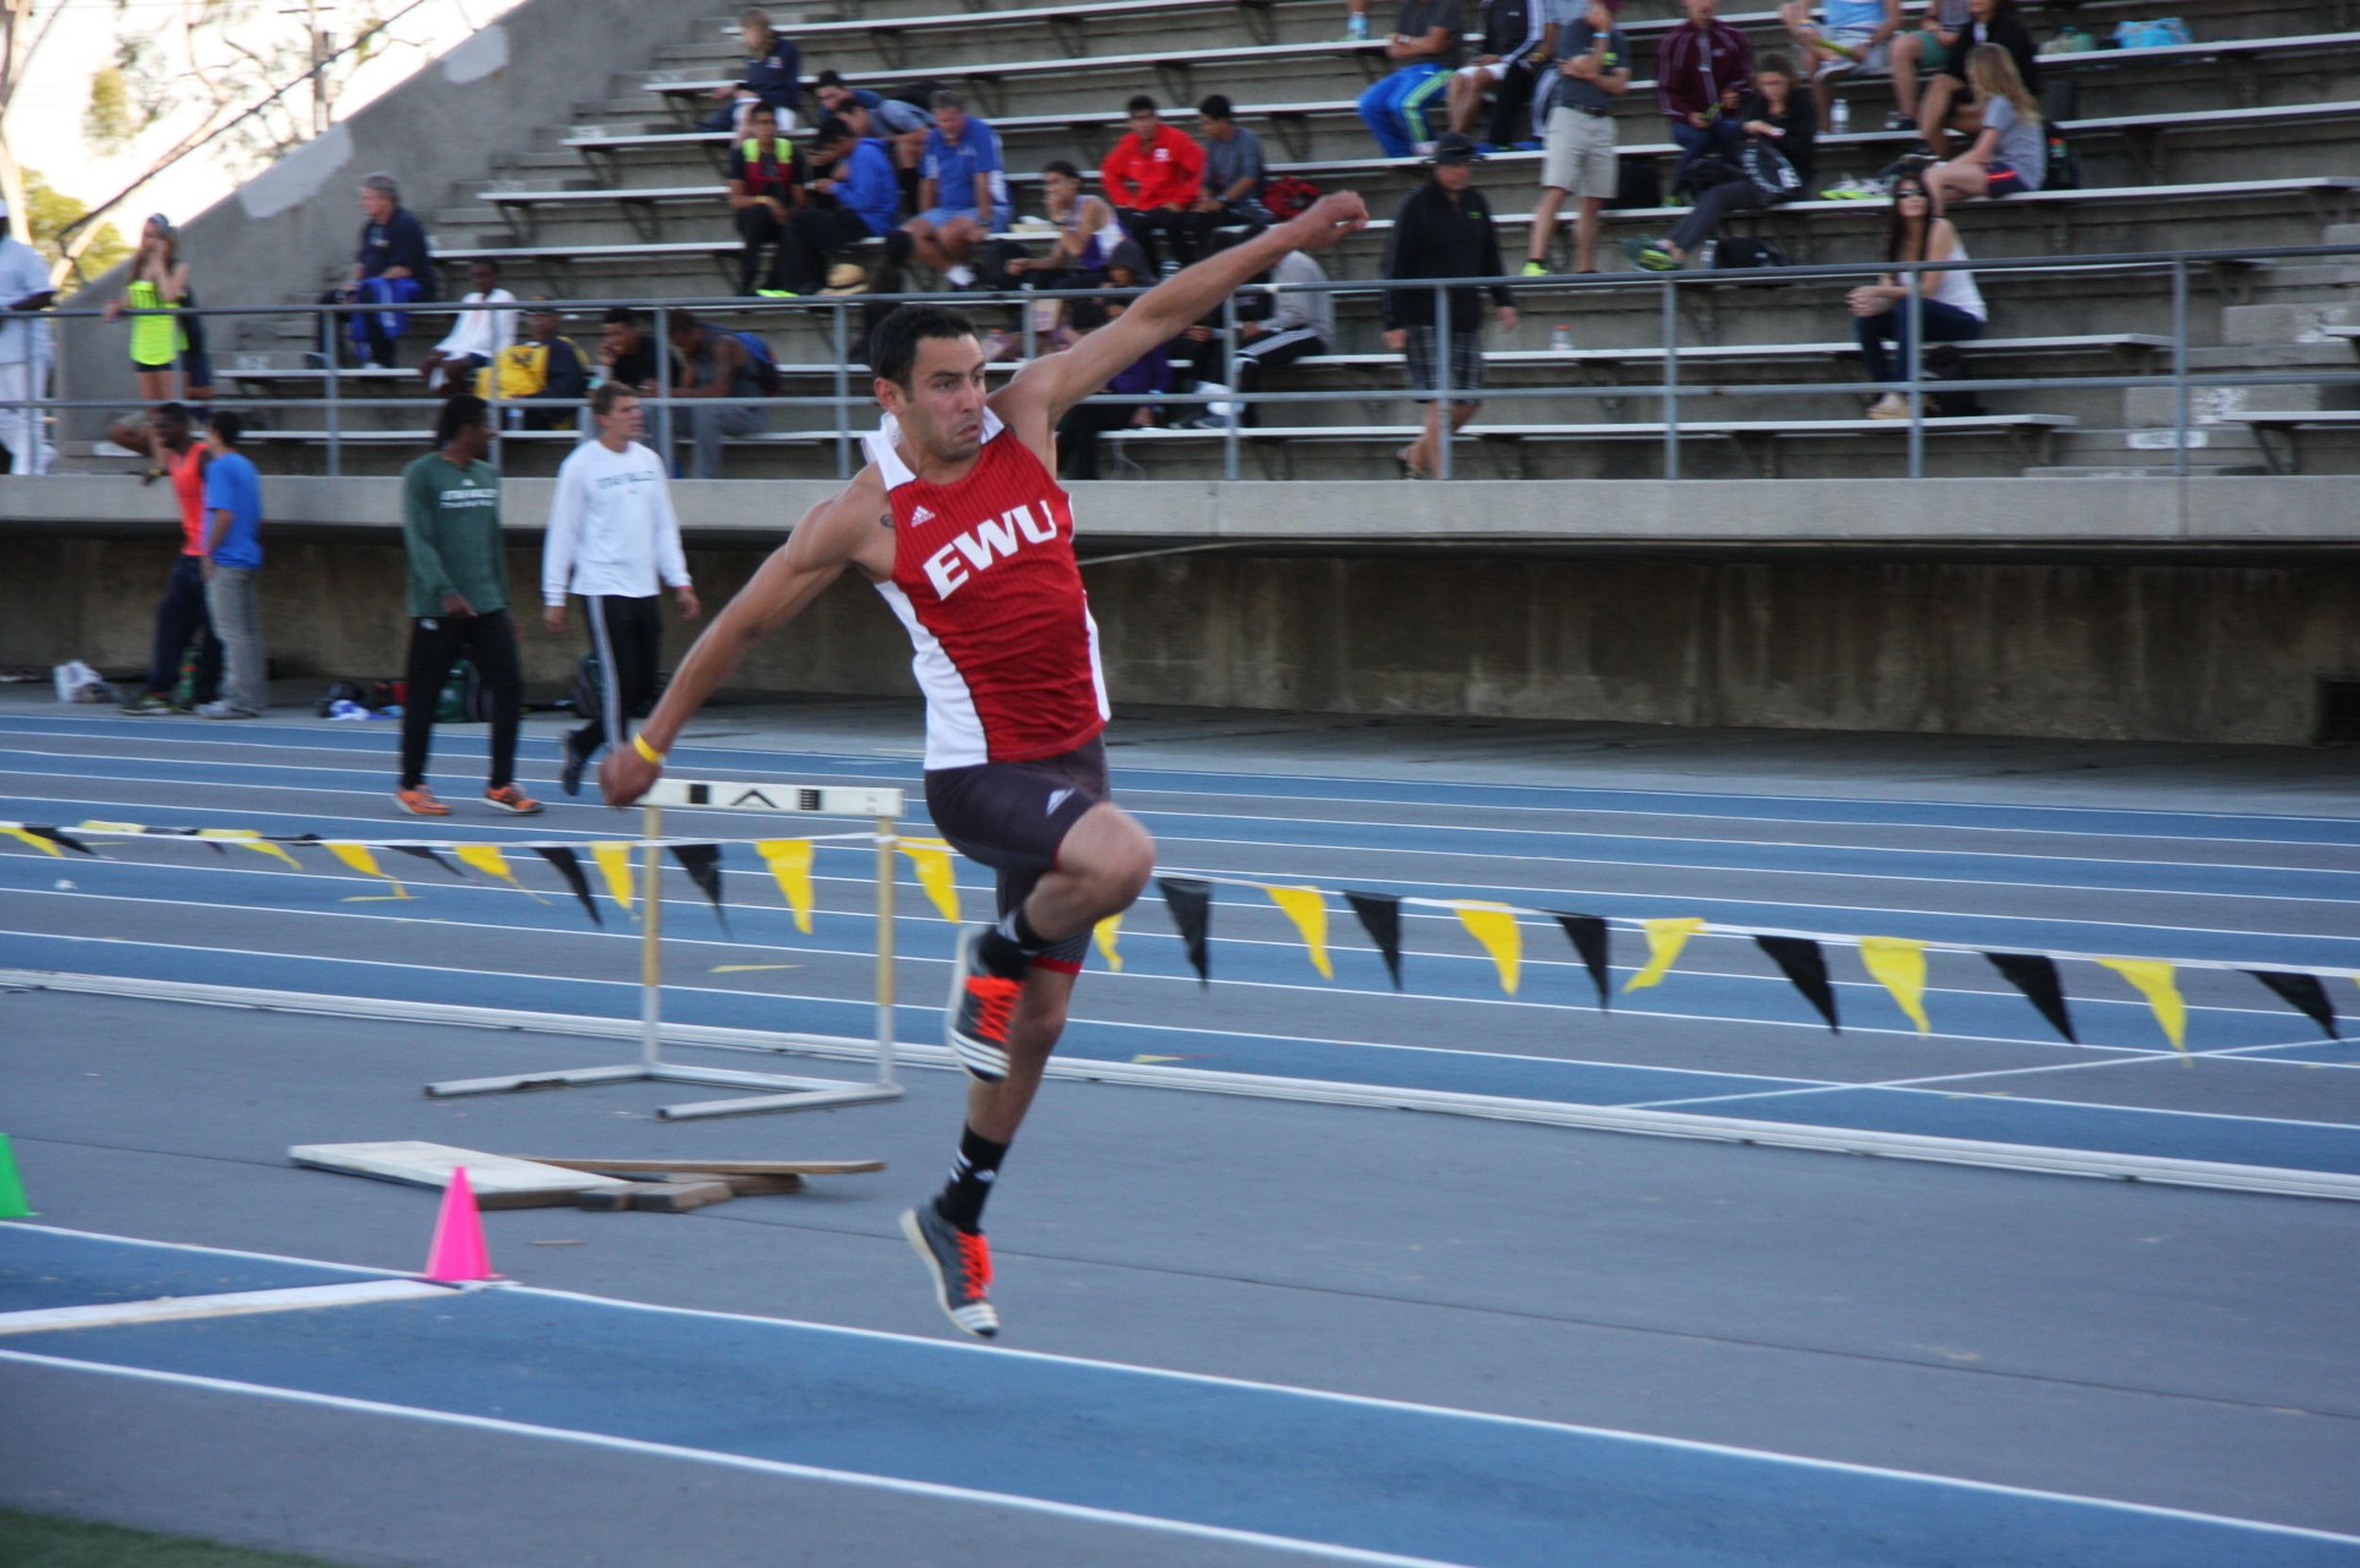 EWU has numbers to finish strong in Big Sky Conference Track and Field